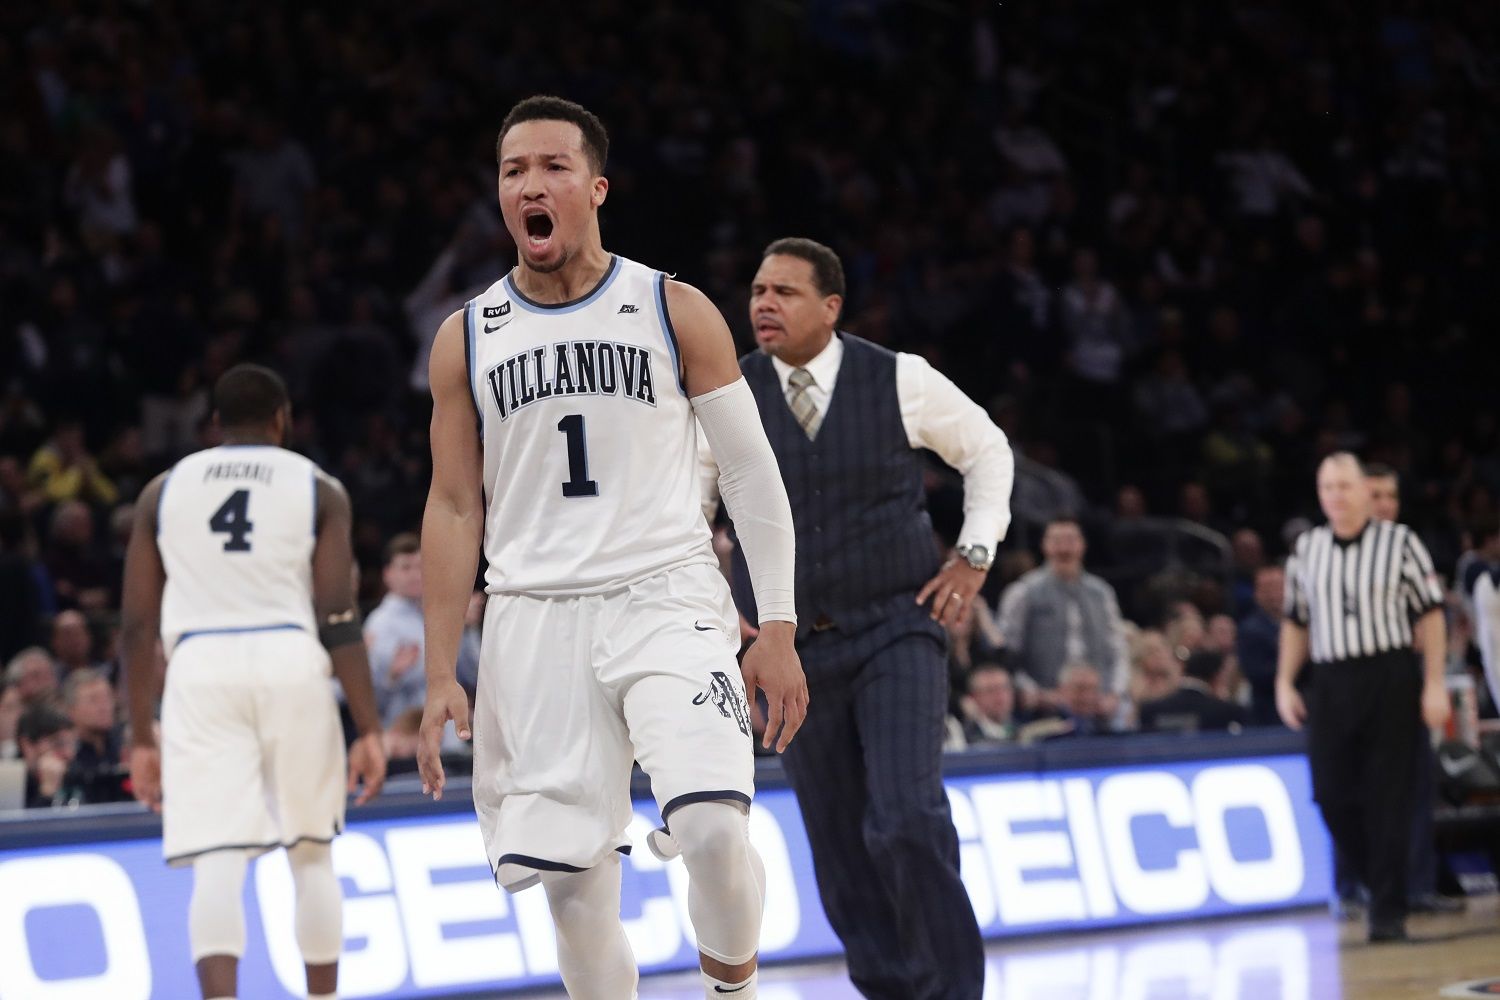 Providence head coach Ed Cooley, right, and Villanova's Jalen Brunson (1) react after Brunson made a three point basket during the second half of an NCAA college basketball game in the Big East men's tournament finals Saturday, March 10, 2018, in New York. (AP Photo/Frank Franklin II)